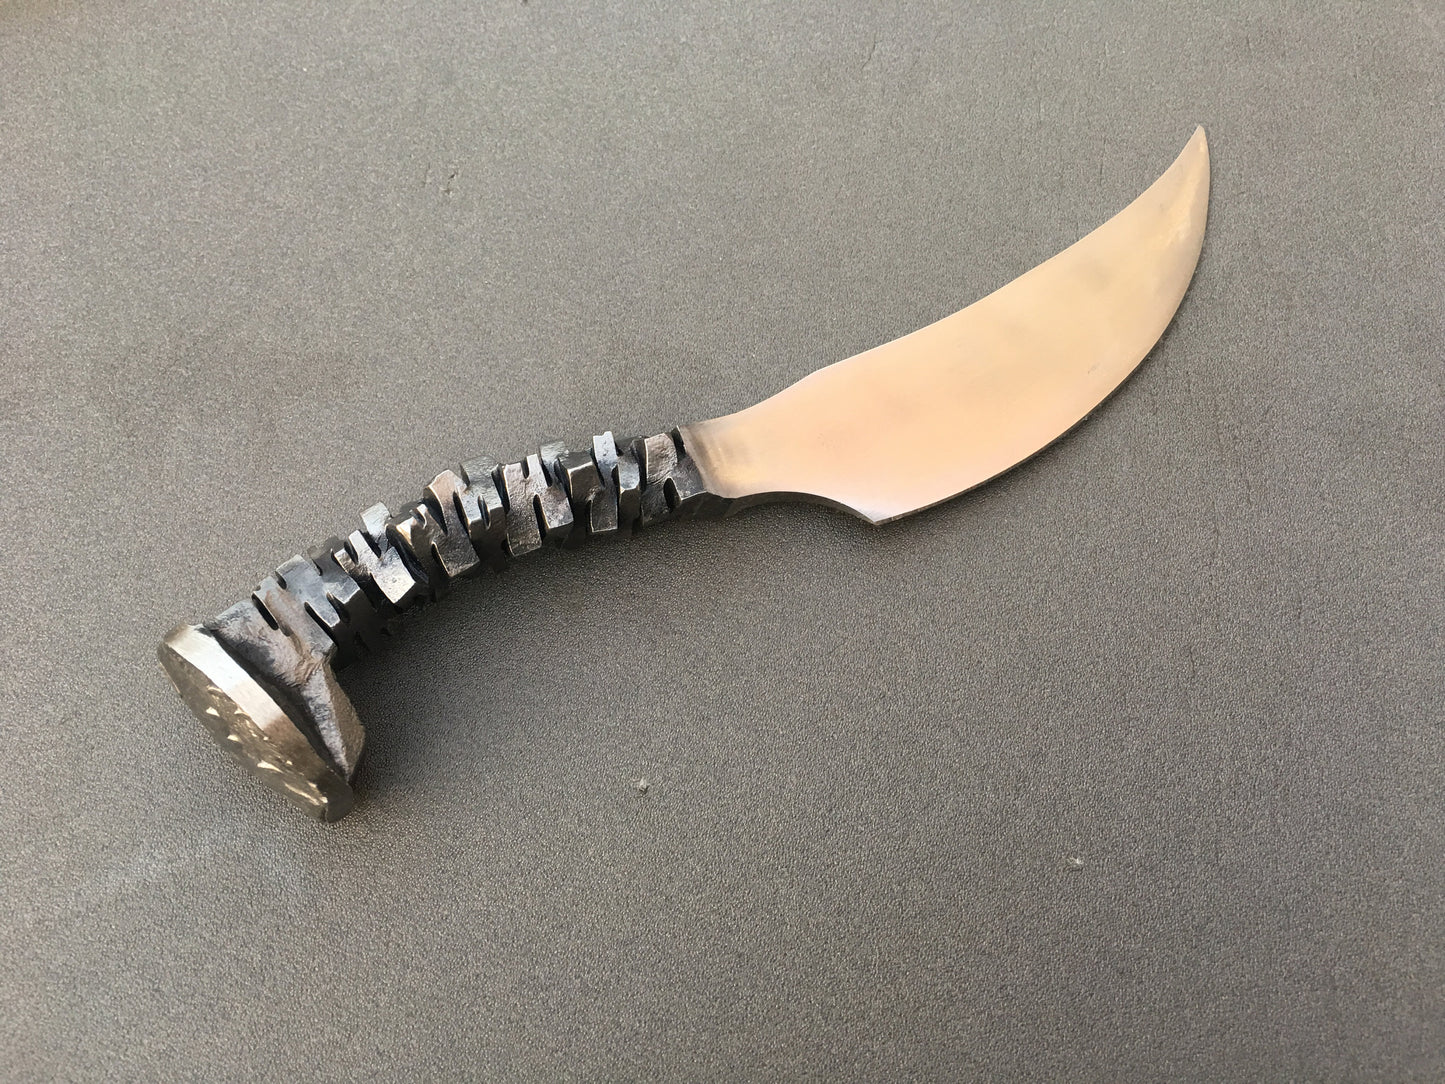 Knife and name, viking knife, railroad spike knife, knives, knife and axe, mens gifts, dads gift,his birthday gift,iron gifts,axe,knife tool